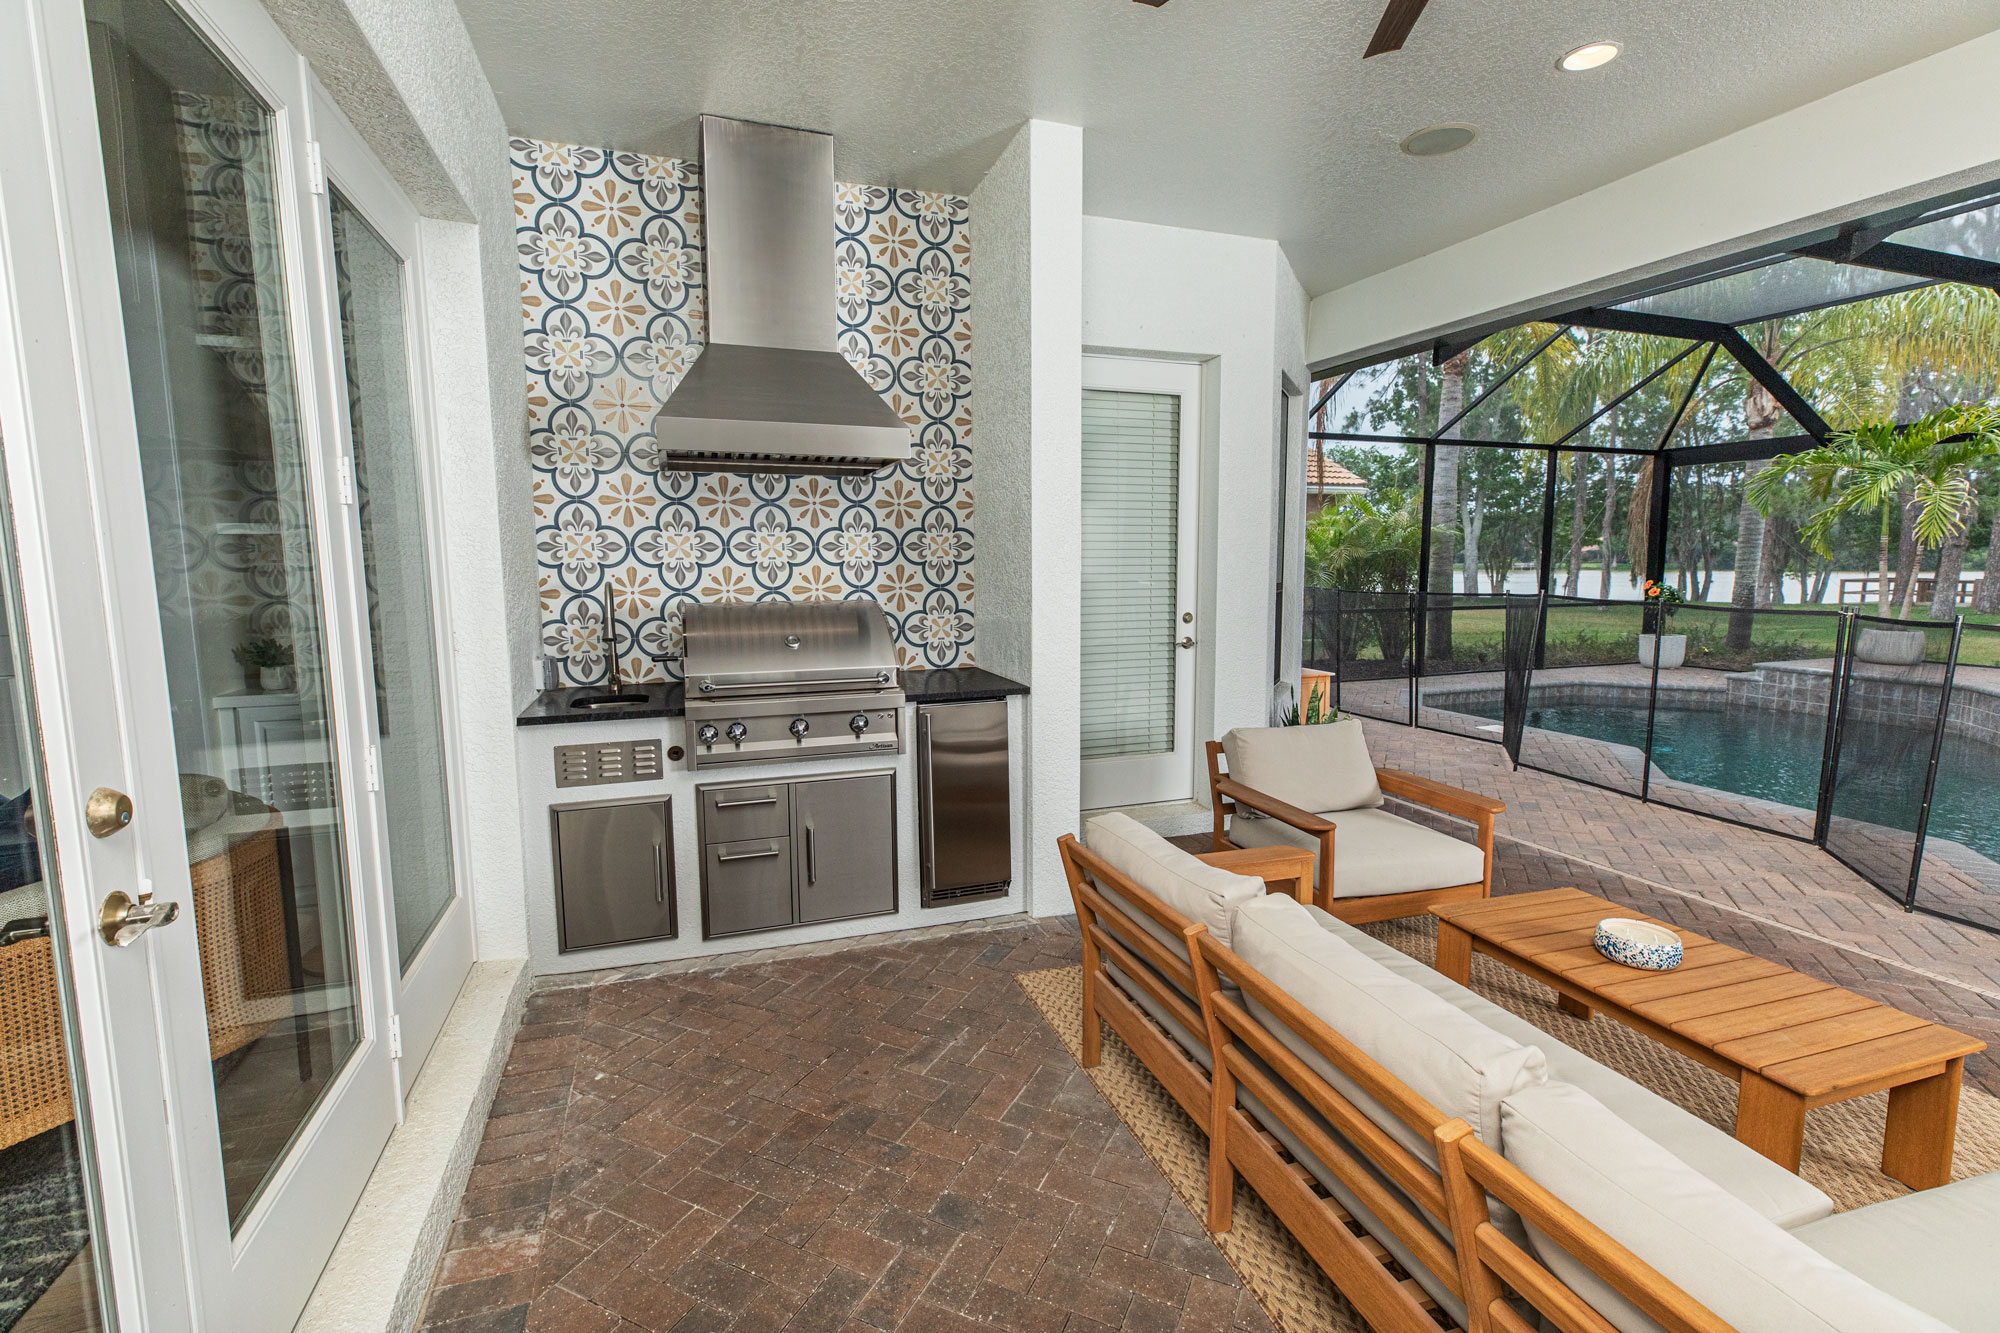 Custom Outdoor Kitchen With Gas Grill, Tile Wall and Vent Hood in Tampa Florida WEB